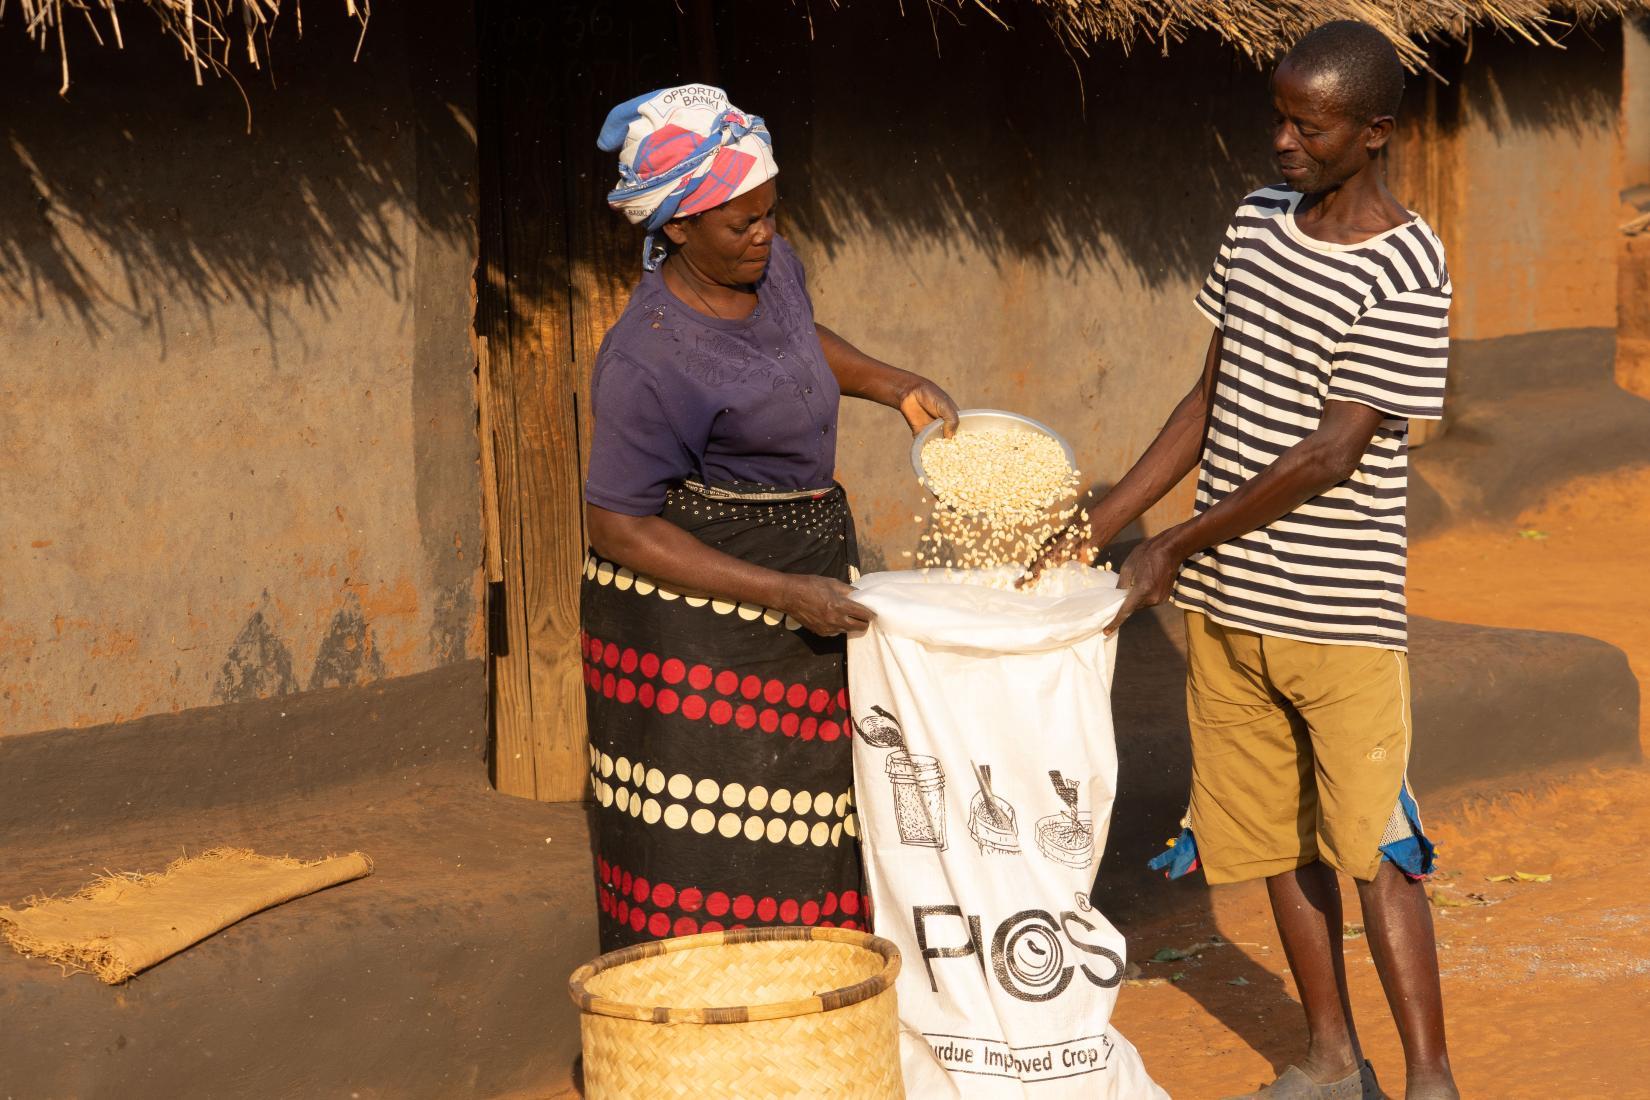 Timothy and his wife Alice put their maize in hermetic bags for safe keeping. Photo: WFP/Badre Bahaji